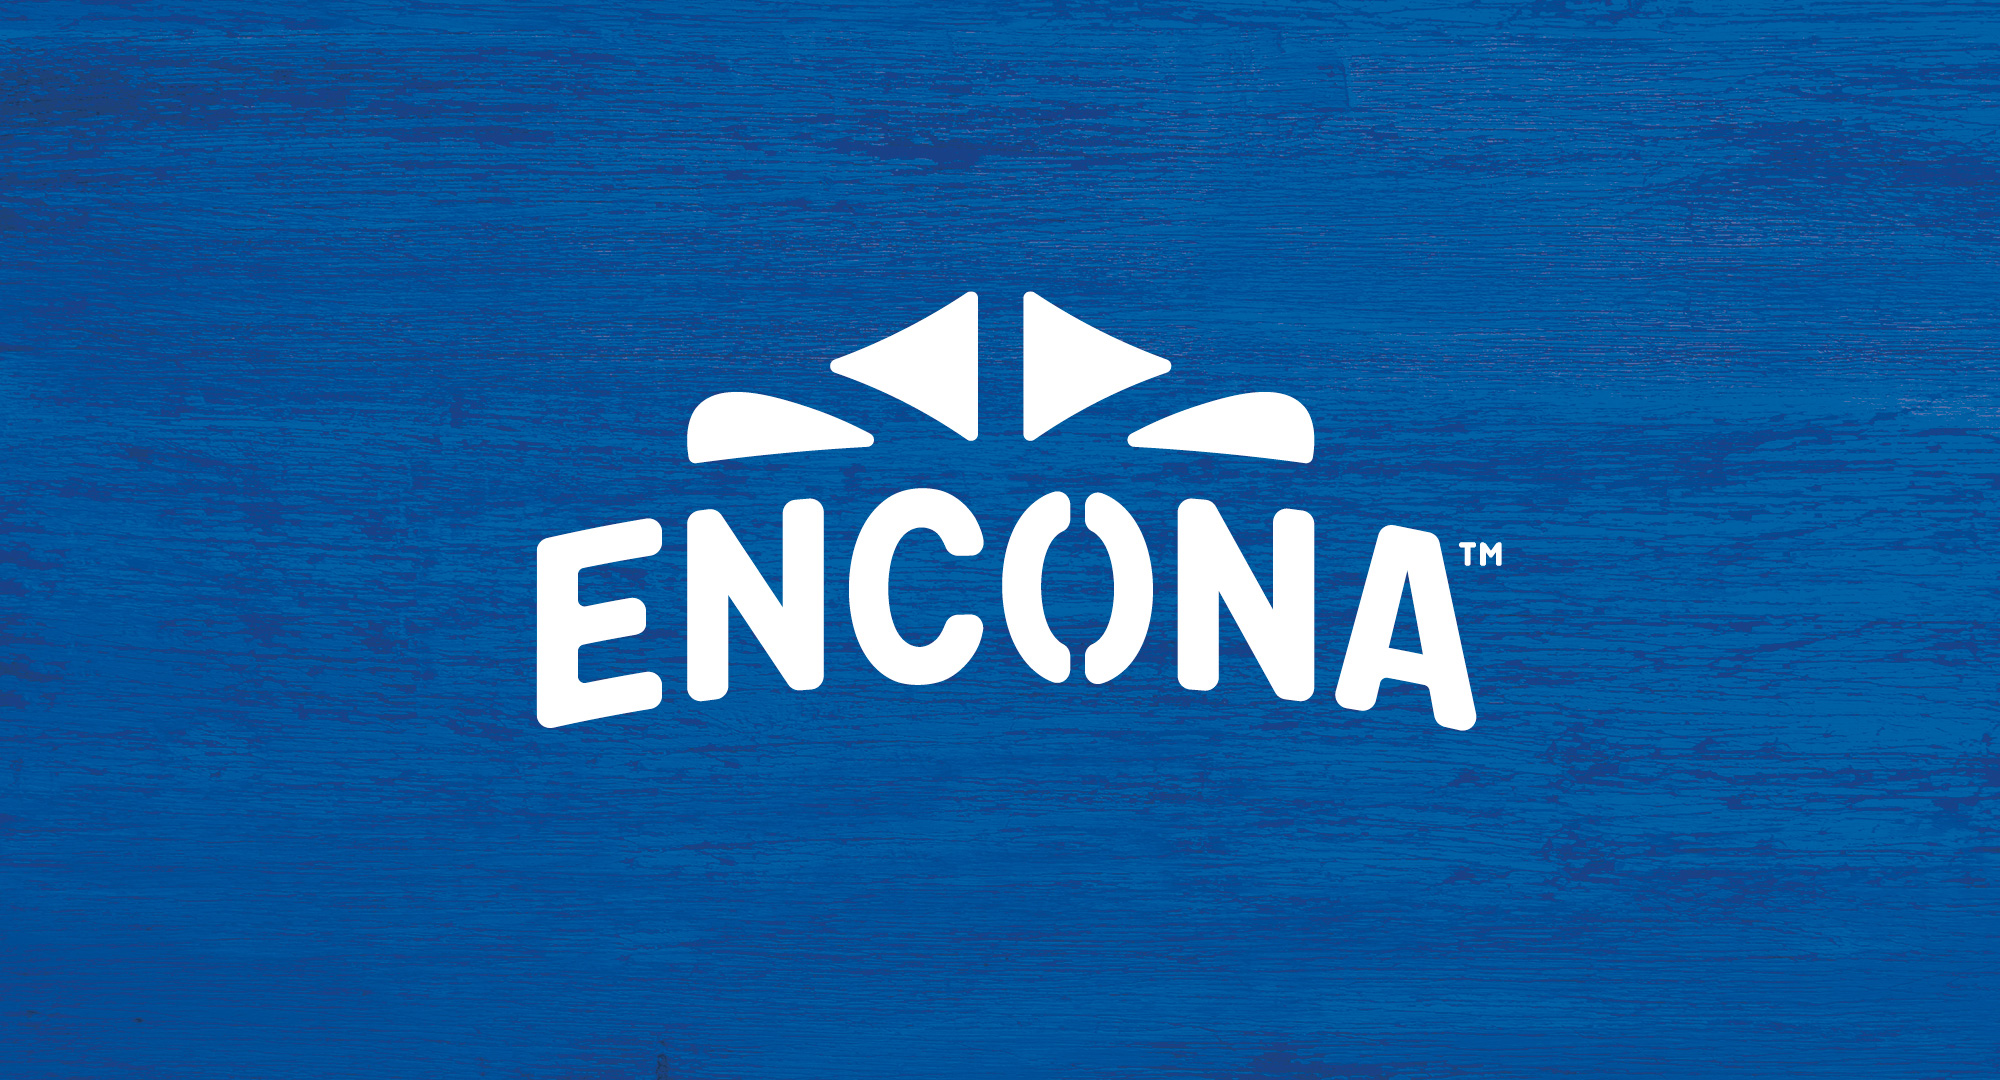 New Logo and Packaging for Encona by Uniform